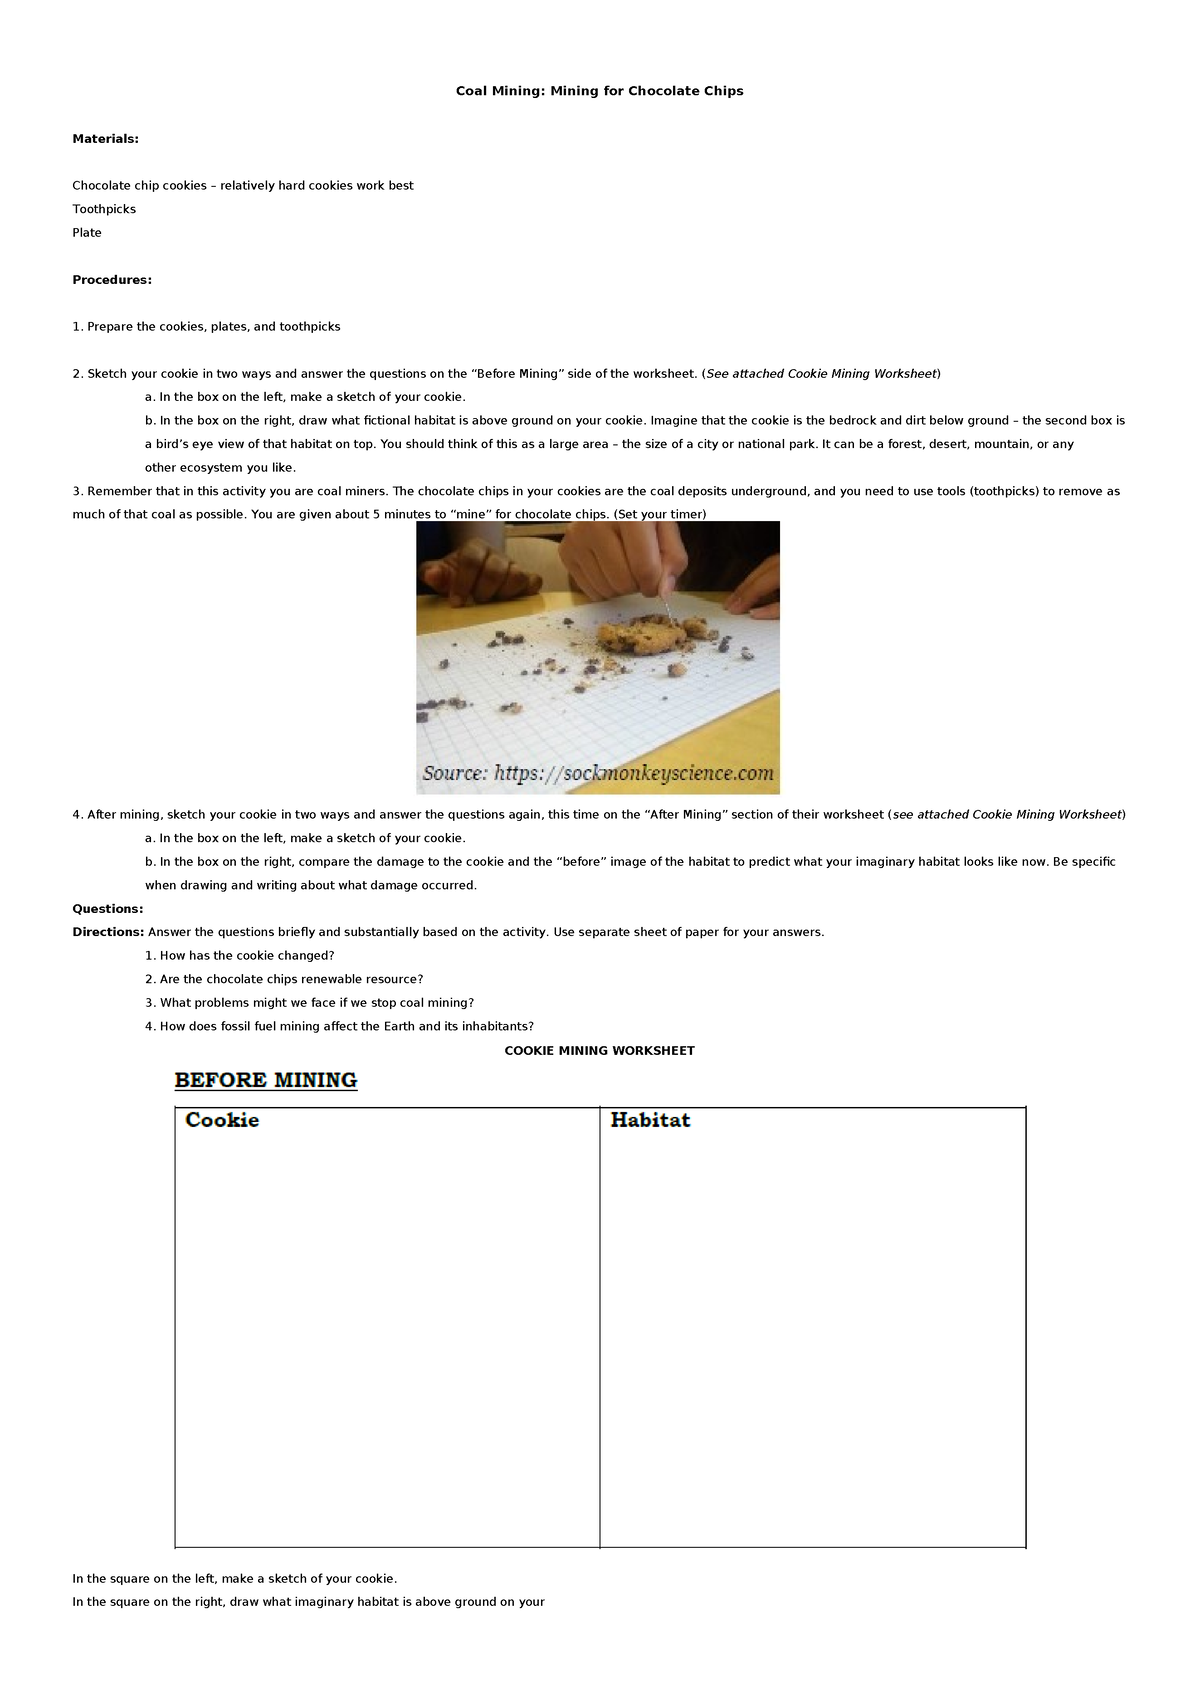 Cookie Mining Worksheet Coal Mining: Mining for Chocolate Chips